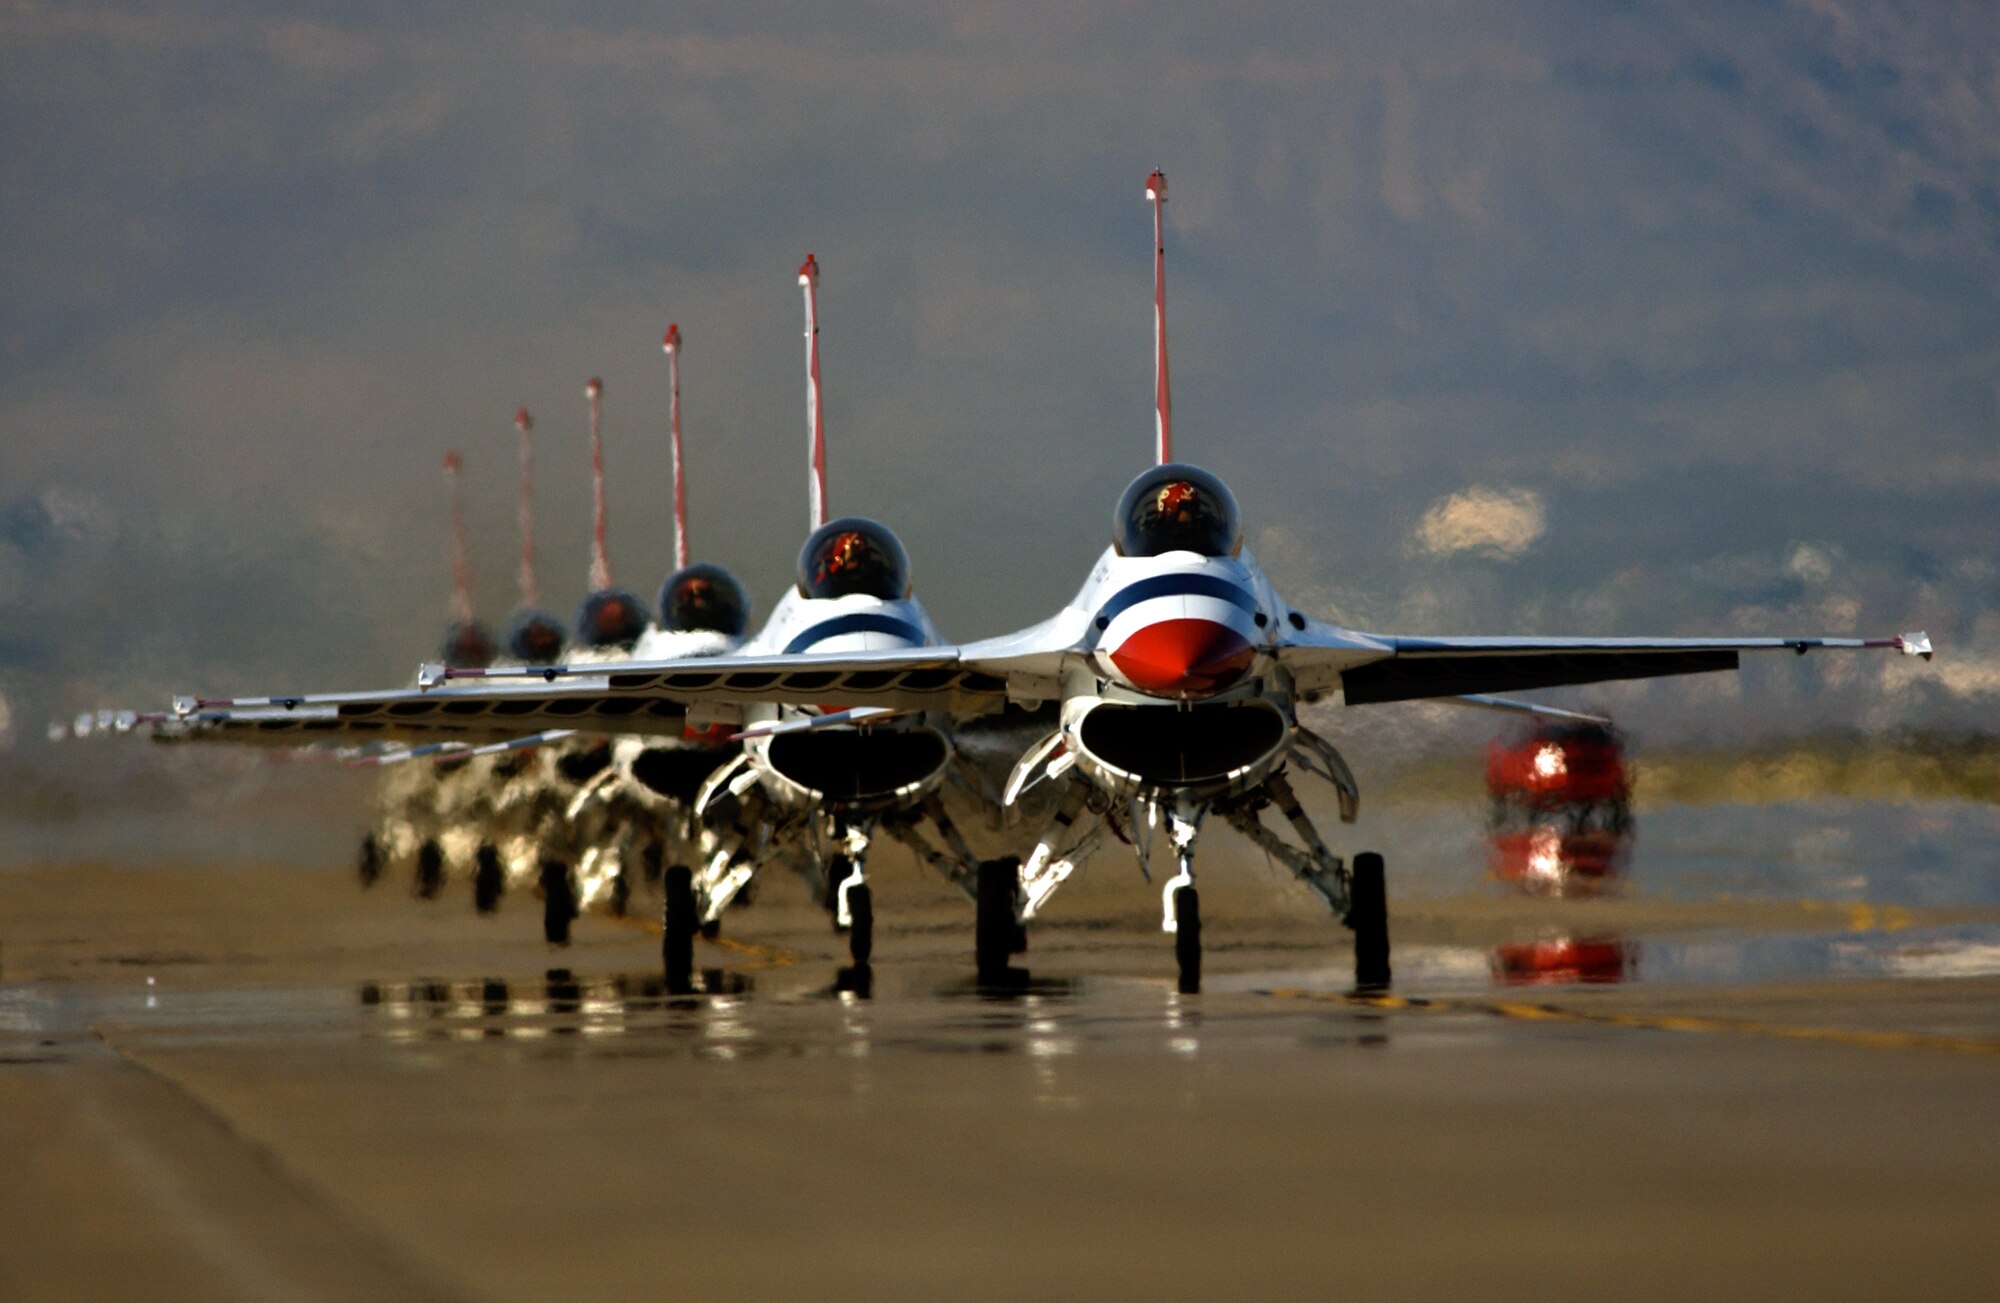 HOLLOMAN AIR FORCE BASE, N.M. -- The U.S. Air Force Thunderbirds taxi back after a successful airshow demonstration here April 17. (U.S. Air Force photo by Tech. Sgt. Justin D. Pyle)                                